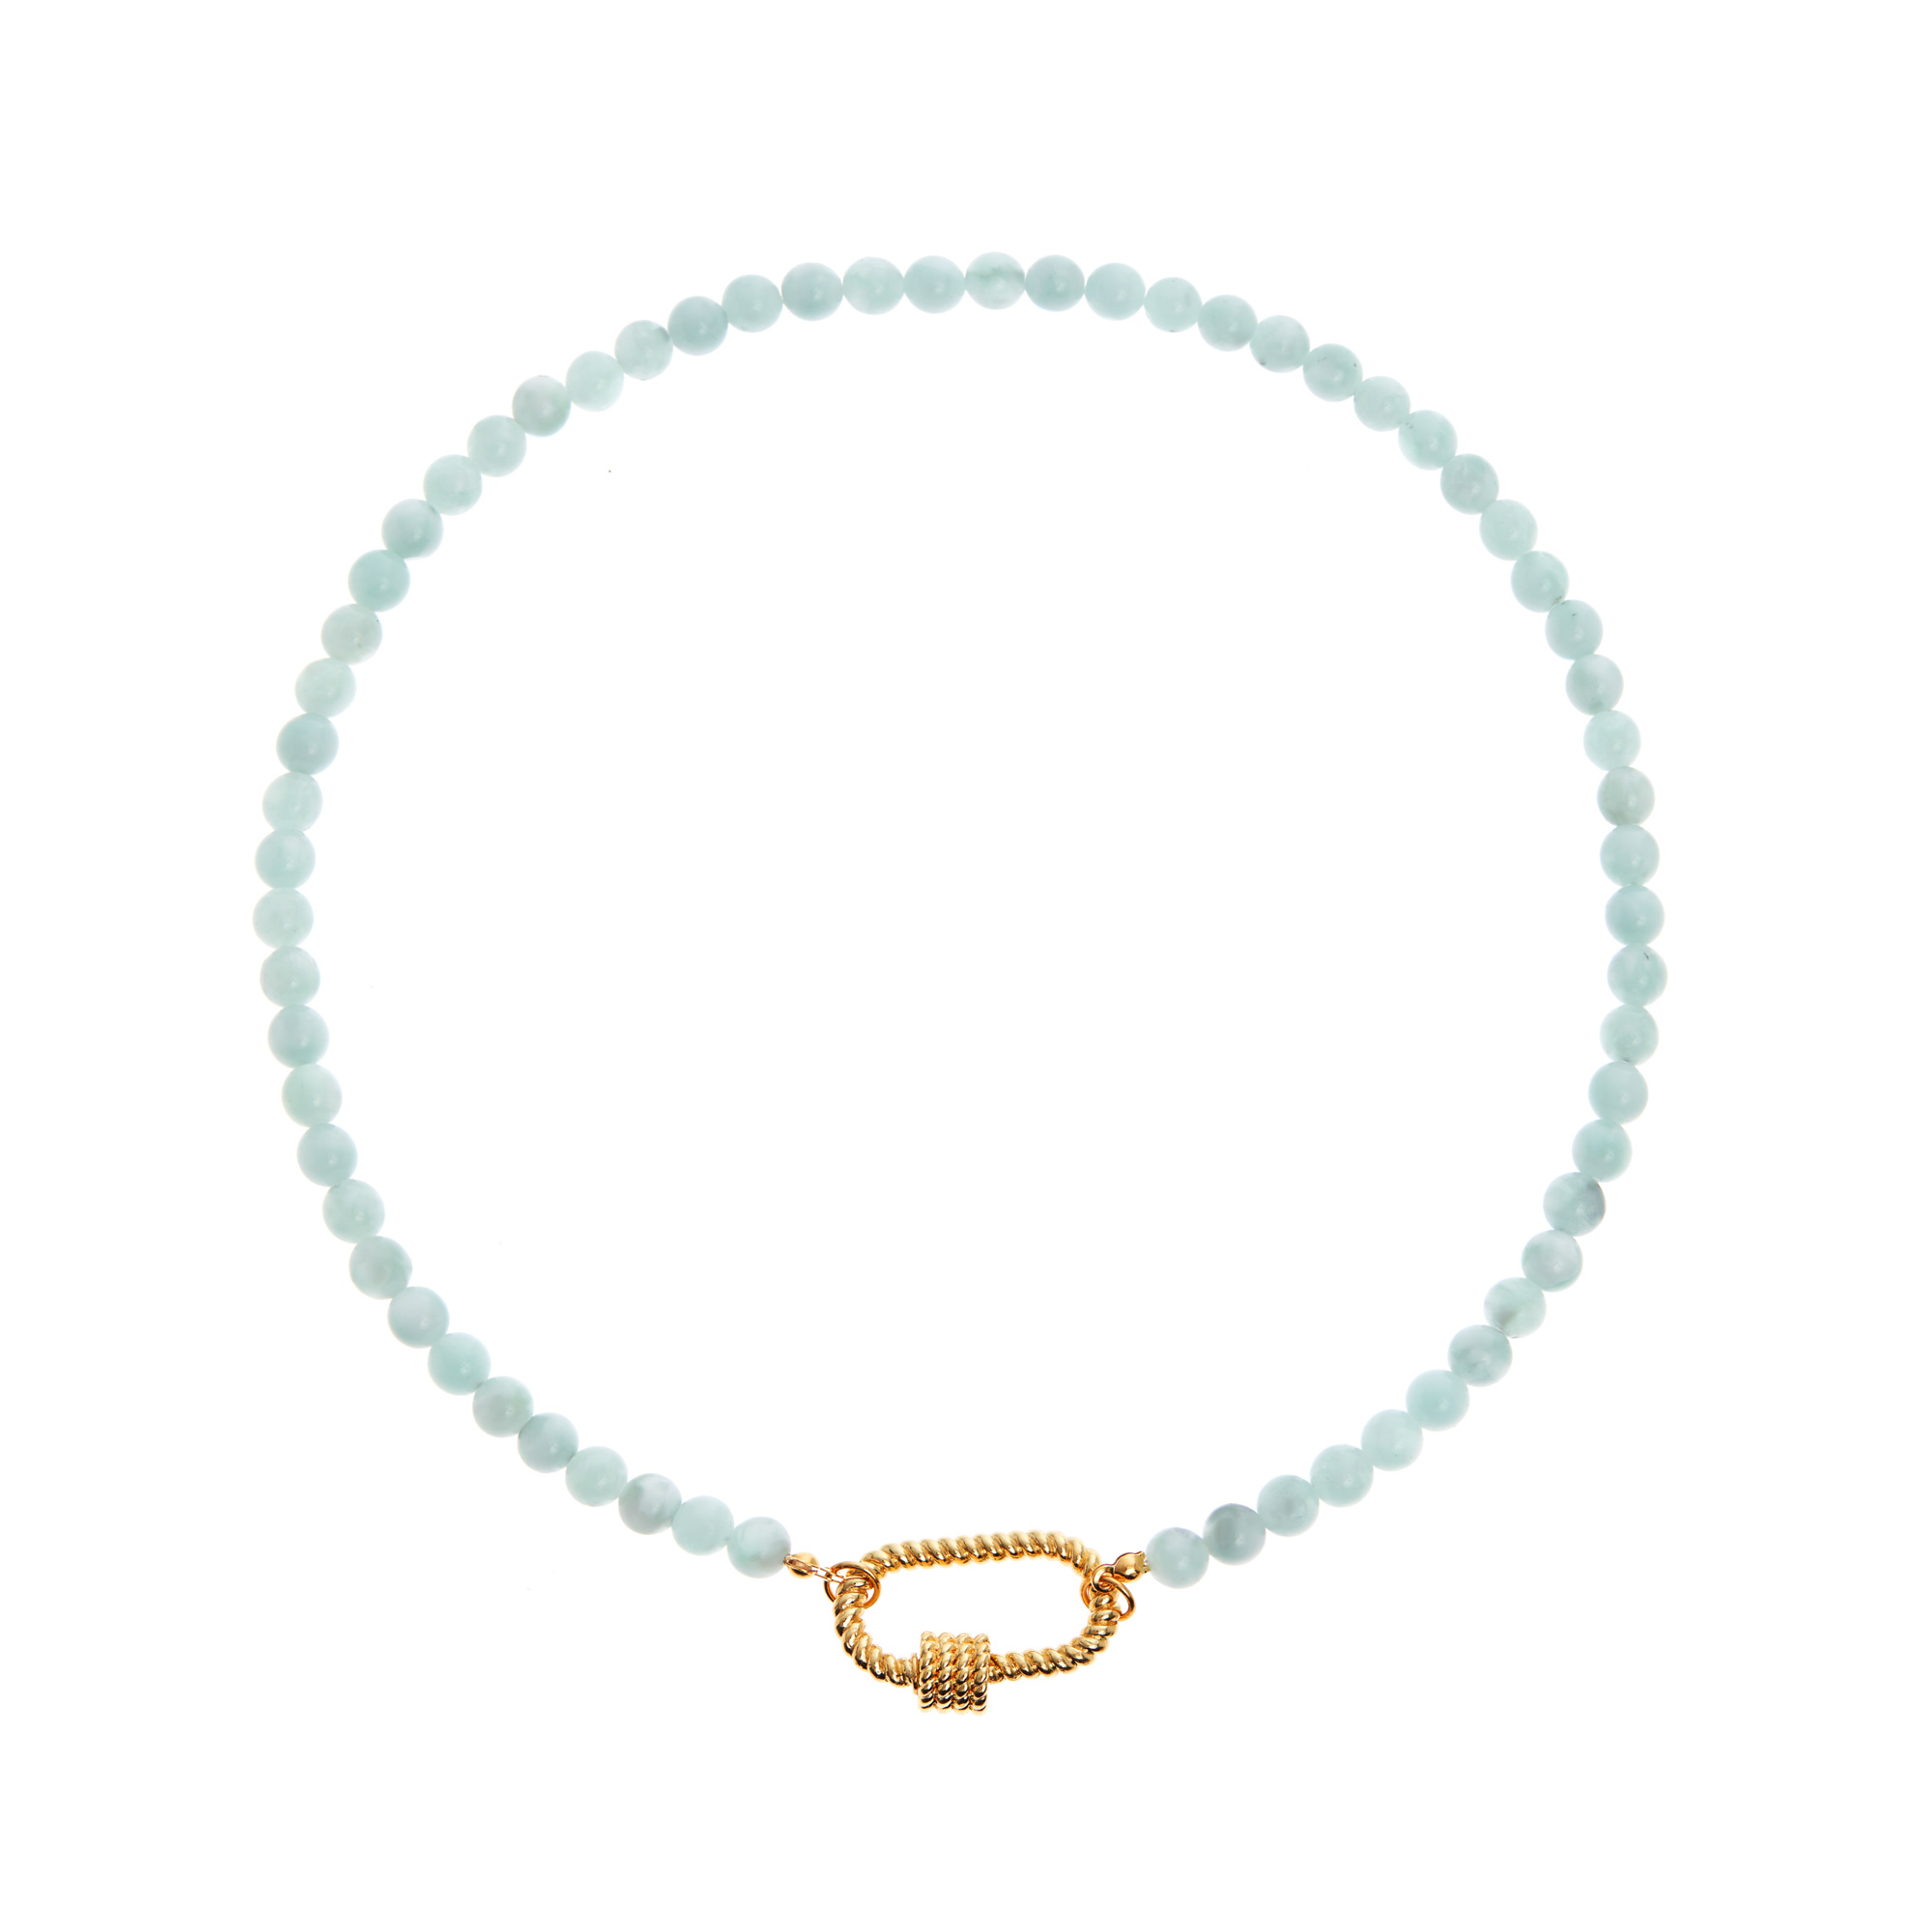 HOLLY JUNE Колье Carabiner Gold Anggelos Necklace колье holly june carabiner necklace turquoise 1 шт